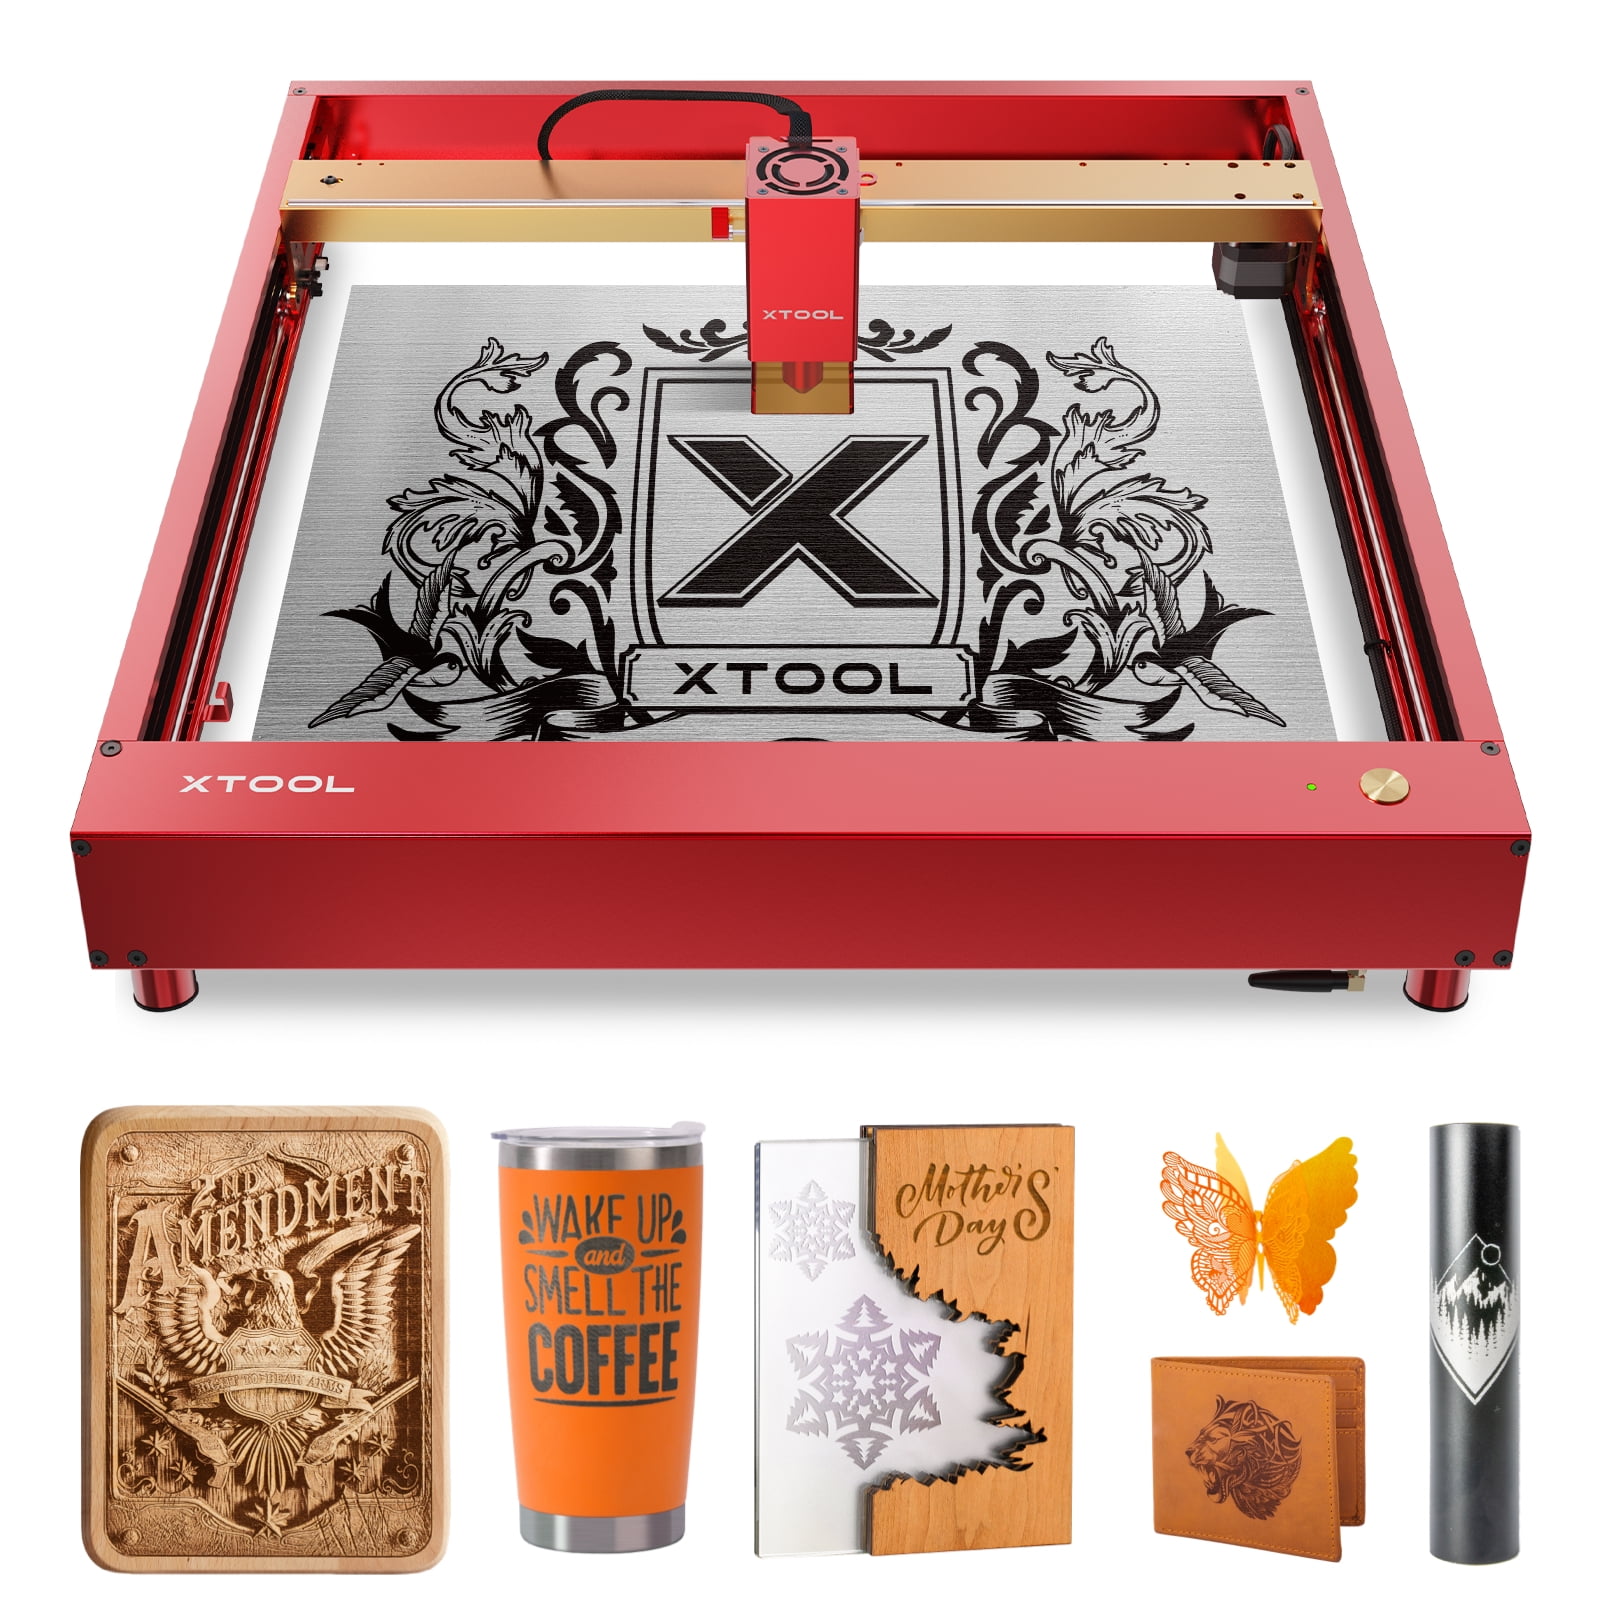 Buy xTool D1 Pro Laser Engraver 5 75w Output Power 400mms Ultra Fast 006mm  Ultra Fine Compressed Spot Higher Accuracy DIY Laser Engraving and Cutting  Machine at Ubuy Pakistan